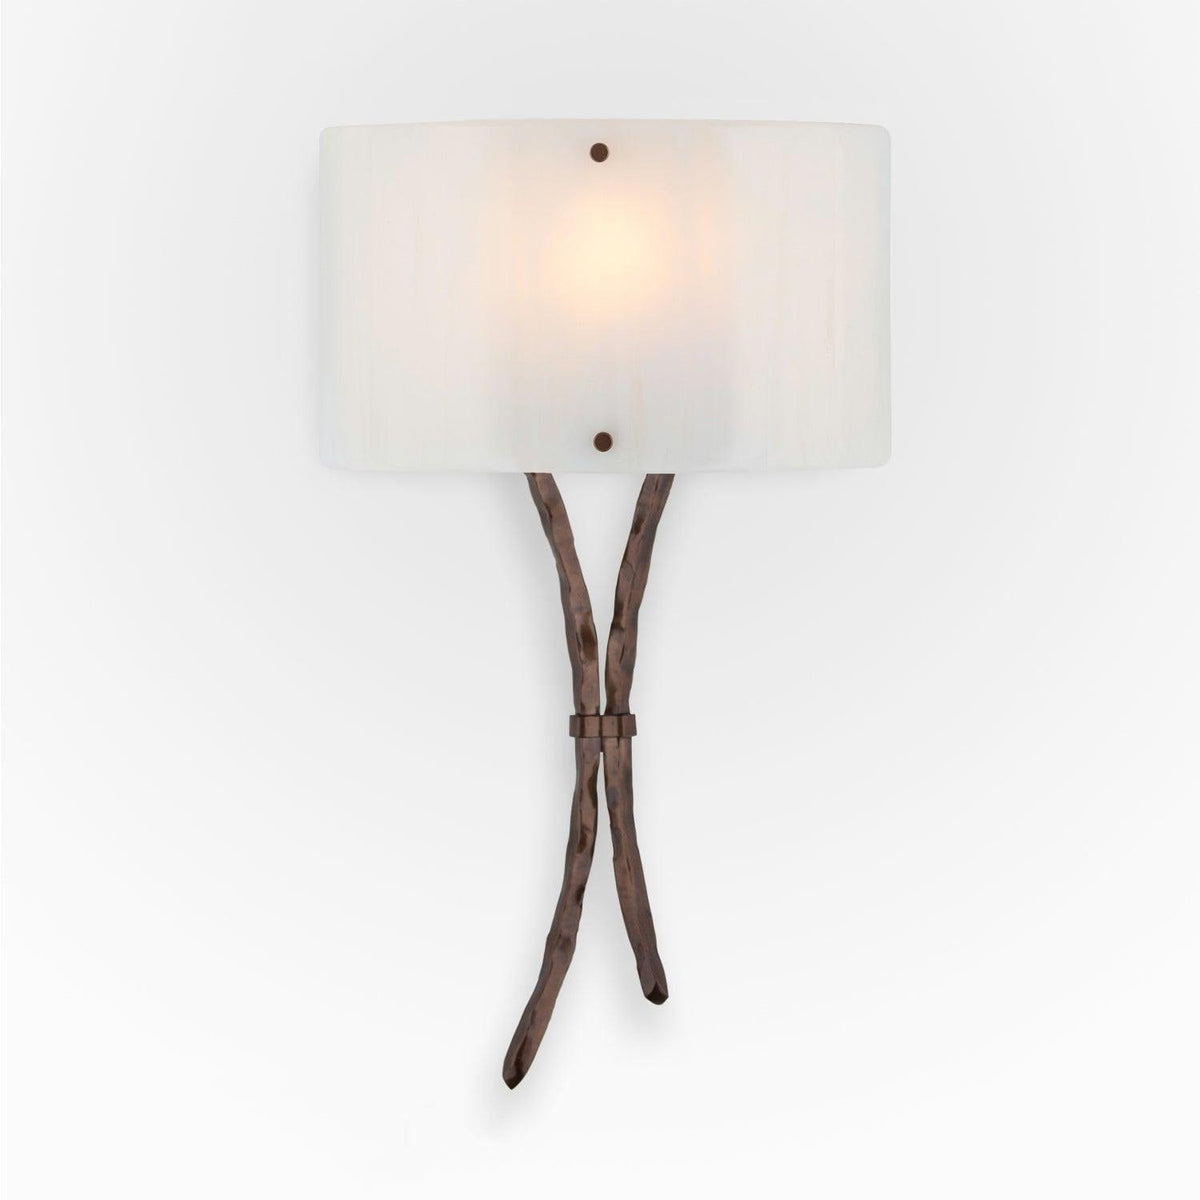 Hammerton Studio - Ironwood Sprout Cover Sconce - CSB0032-0B-RB-IW-E2 | Montreal Lighting & Hardware